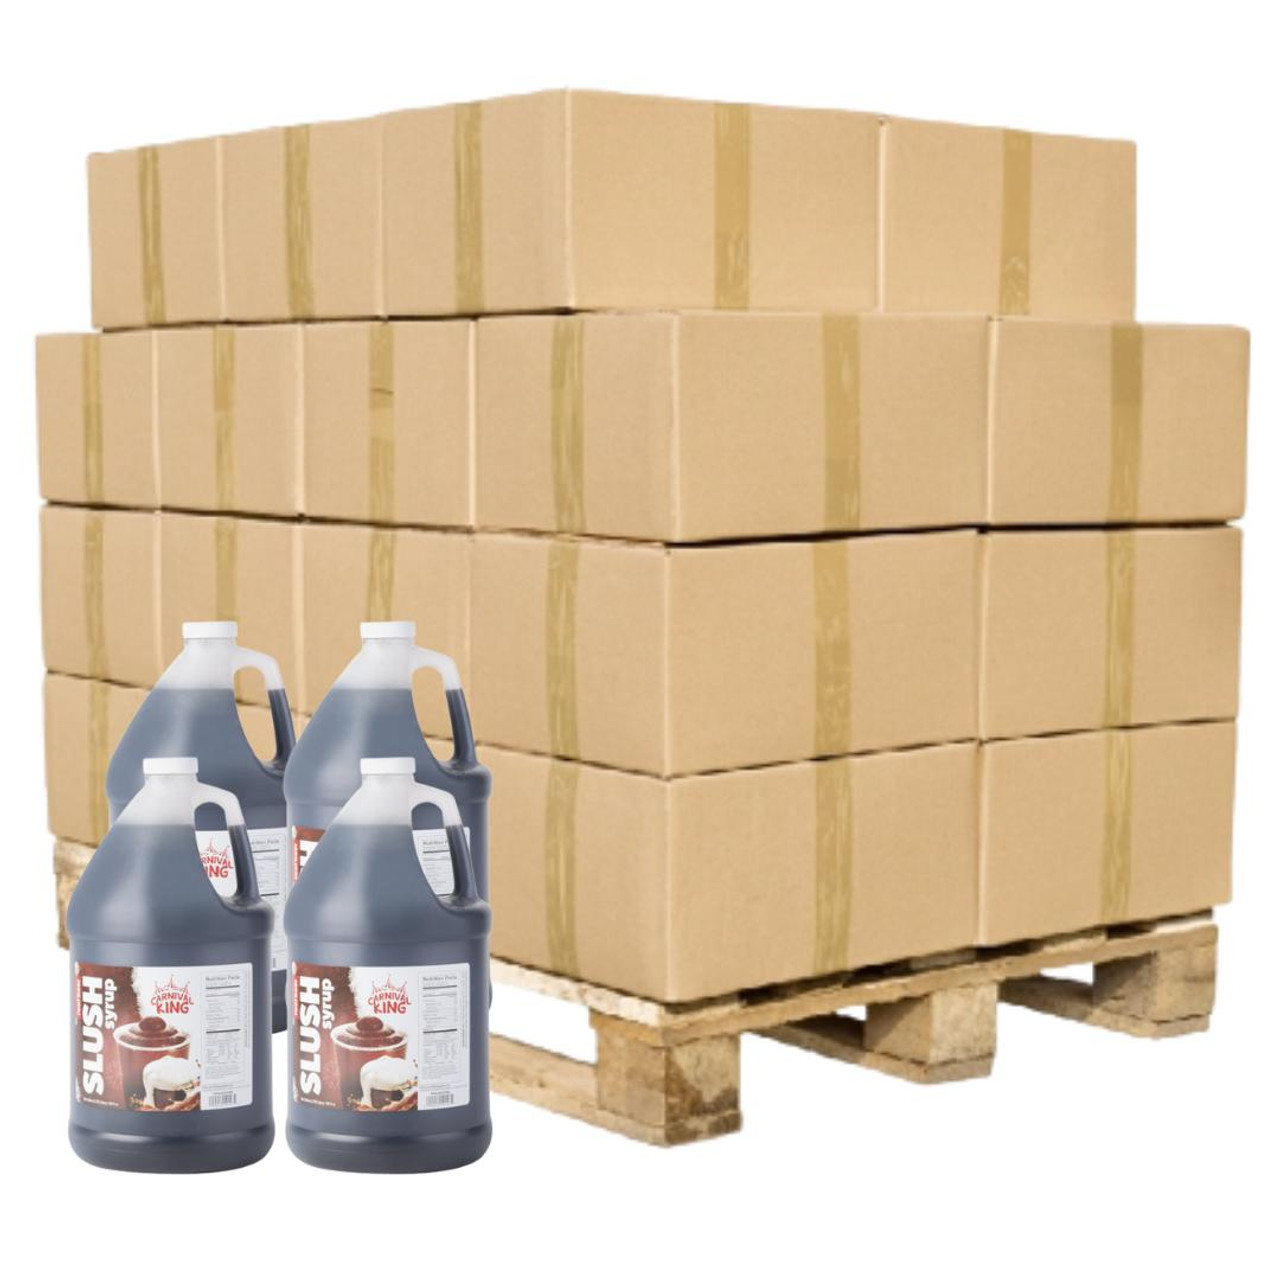 CONCESSION Concession Stand Root Beer Slushy Syrup 5:1 Bulk Food Service Concentrate | 1 Gallon | 4/CASE | 48 CASES PER PALLET (192 BOTTLES) 